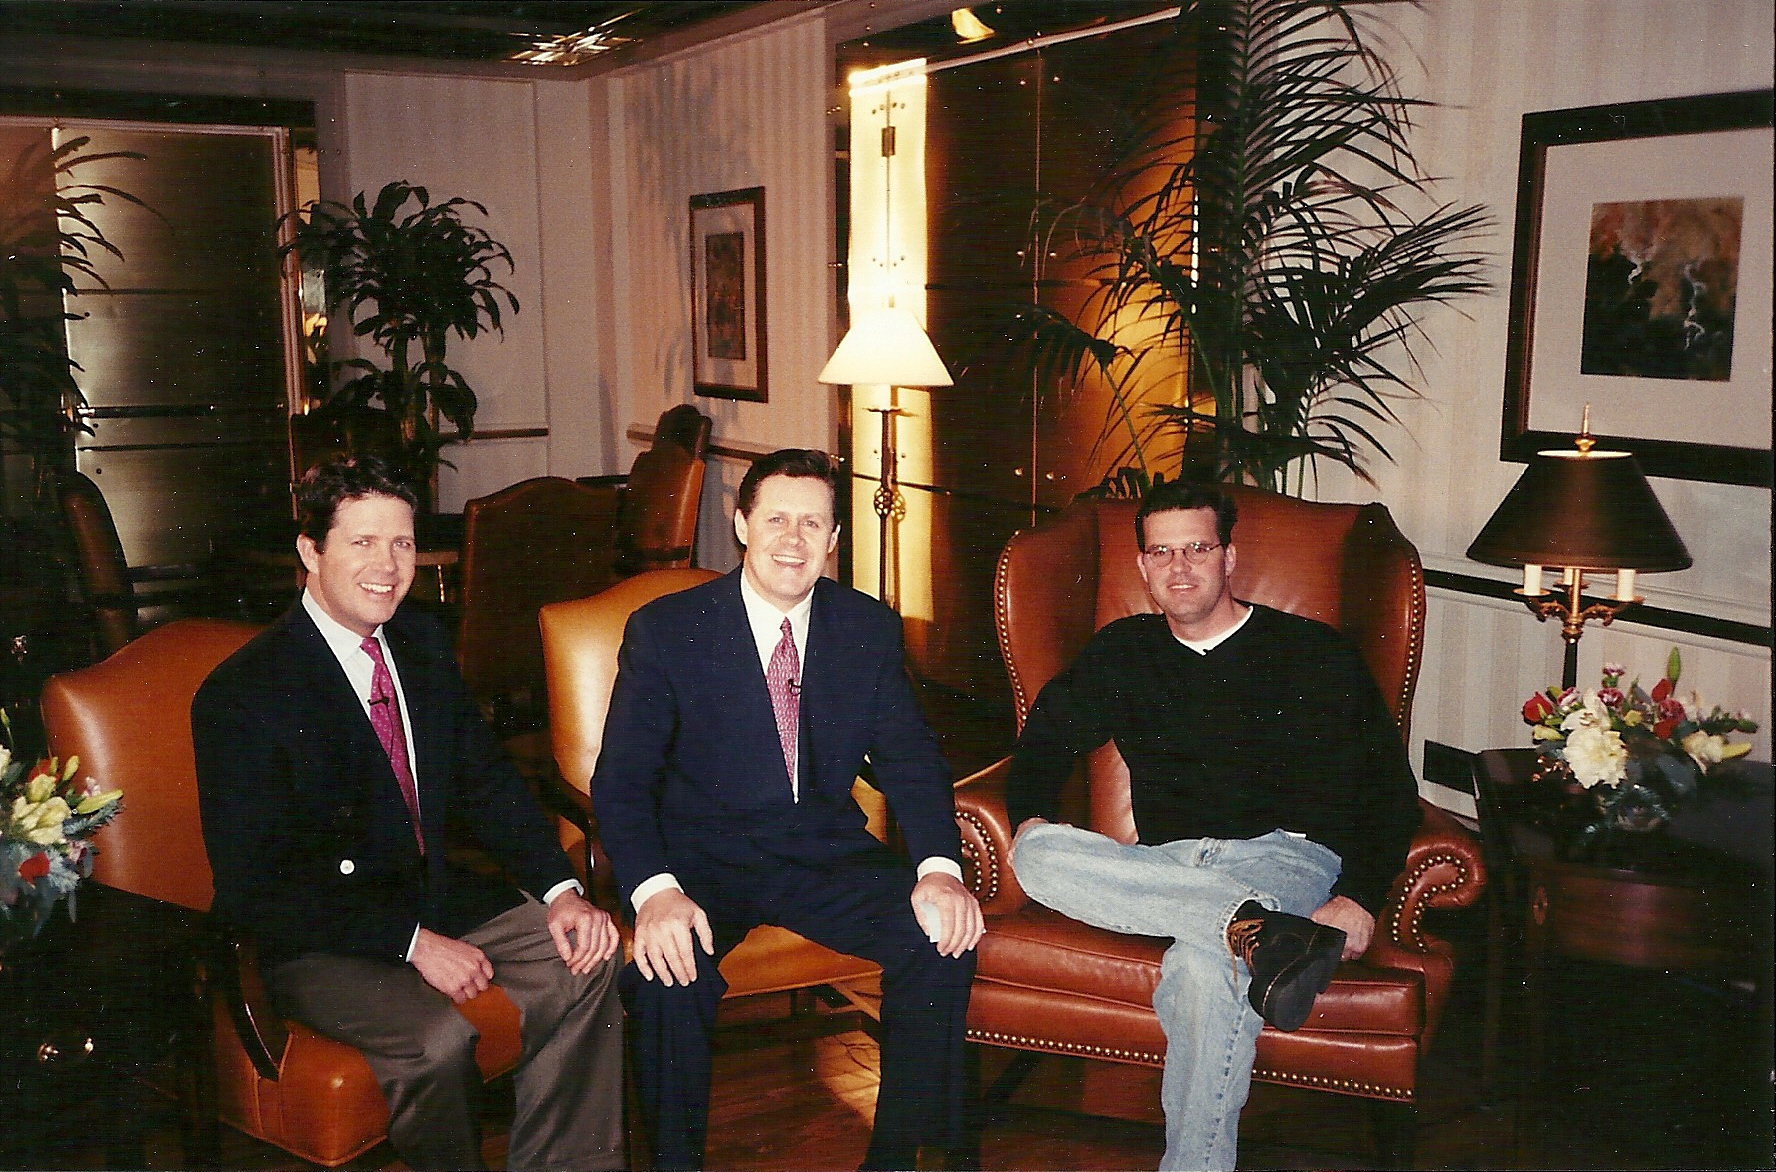 The McCain Brothers with movie producer Chad Oman.